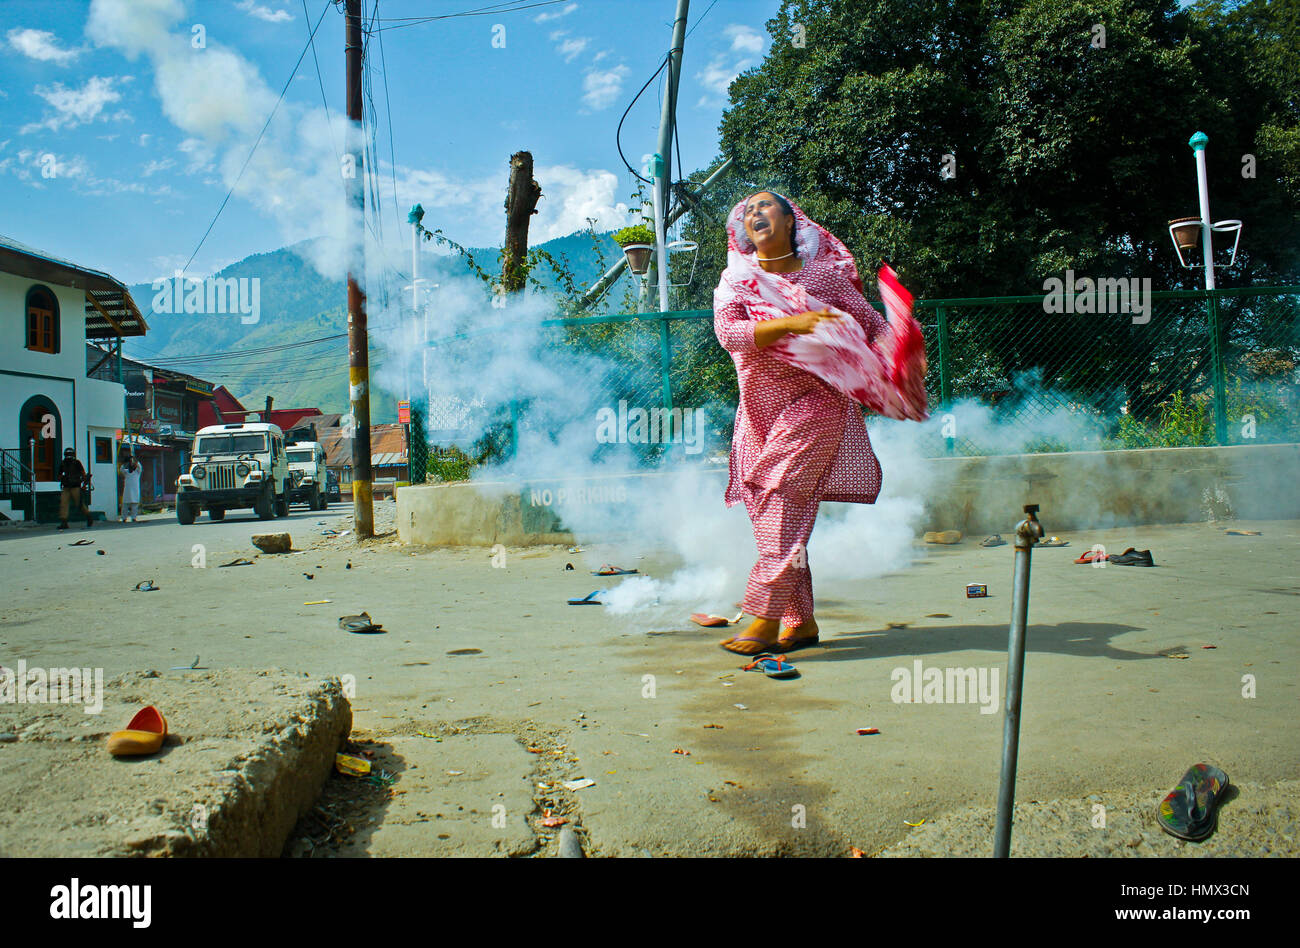 Kashmir Uprising 2016: A woman throws a tear smoke shell back at forces during a protest rally in Indian-administered Kashmir on  19 August 2016. Stock Photo